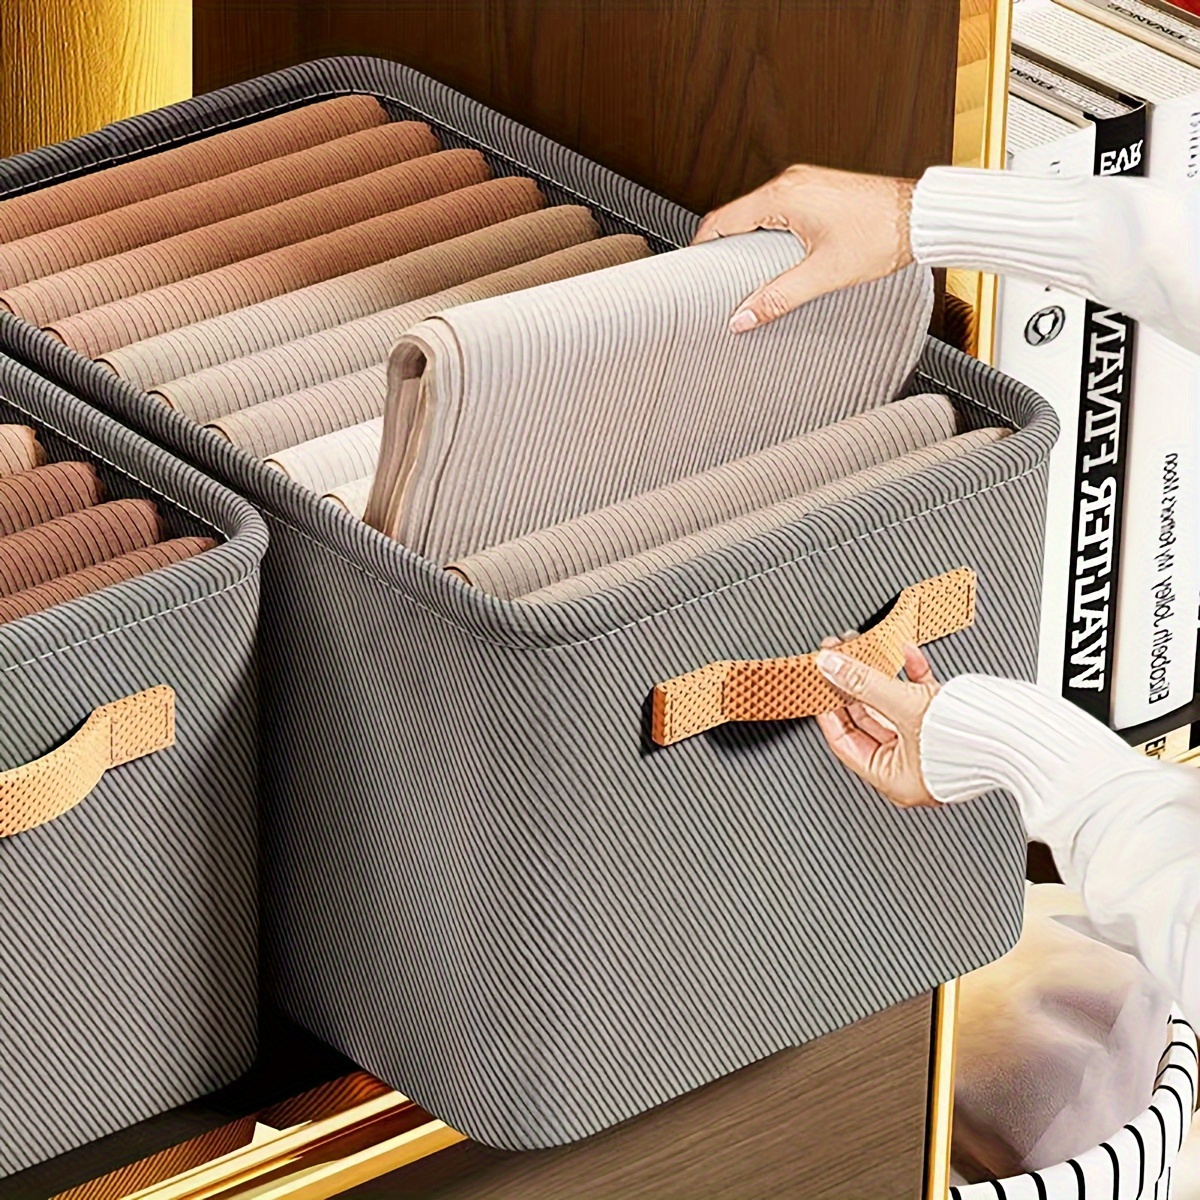 Fab totes Storage Bins [3-Pack], Foldable Storage Baskets for Organizing  Toys, Books, Shelves, Closet, Large Storage Box with Rope Handles, Sturdy